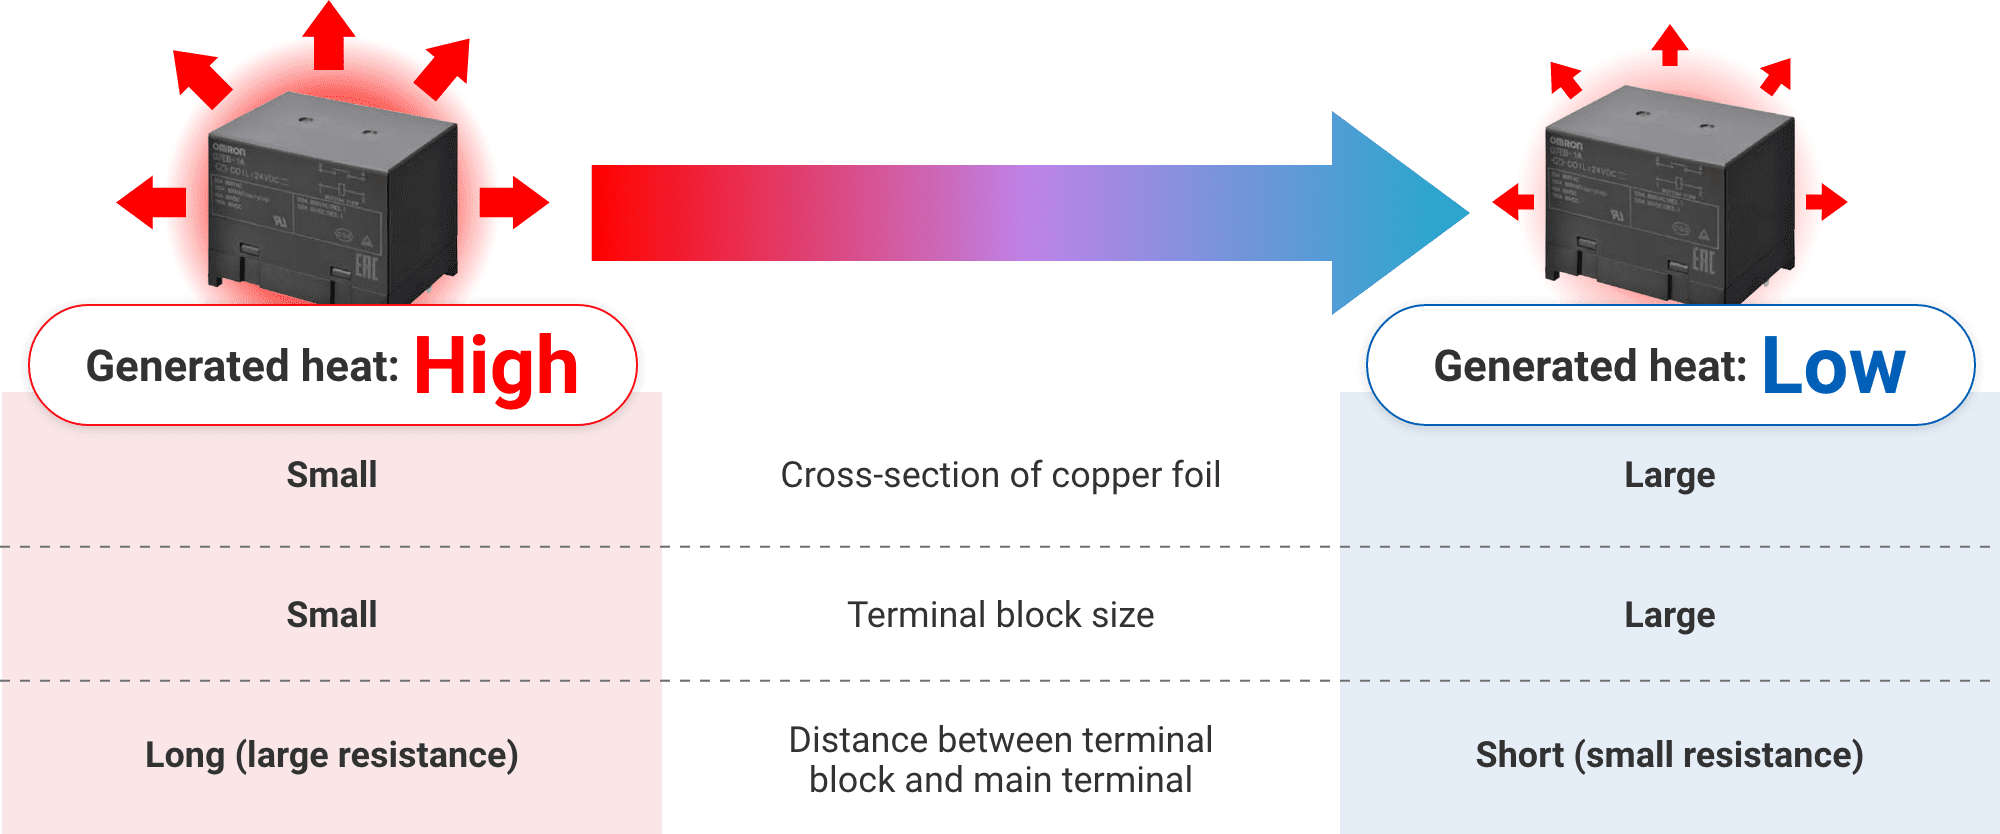 (Generated heat: High)Cross-section of copper foil:Small, Terminal block size:Small, Distance between terminal block and main terminal:Long (large resistance)(Generated heat: Low)Cross-section of copper foil:Large, Terminal block size:Large, Distance between terminal block and main terminal:Short (small resistance)